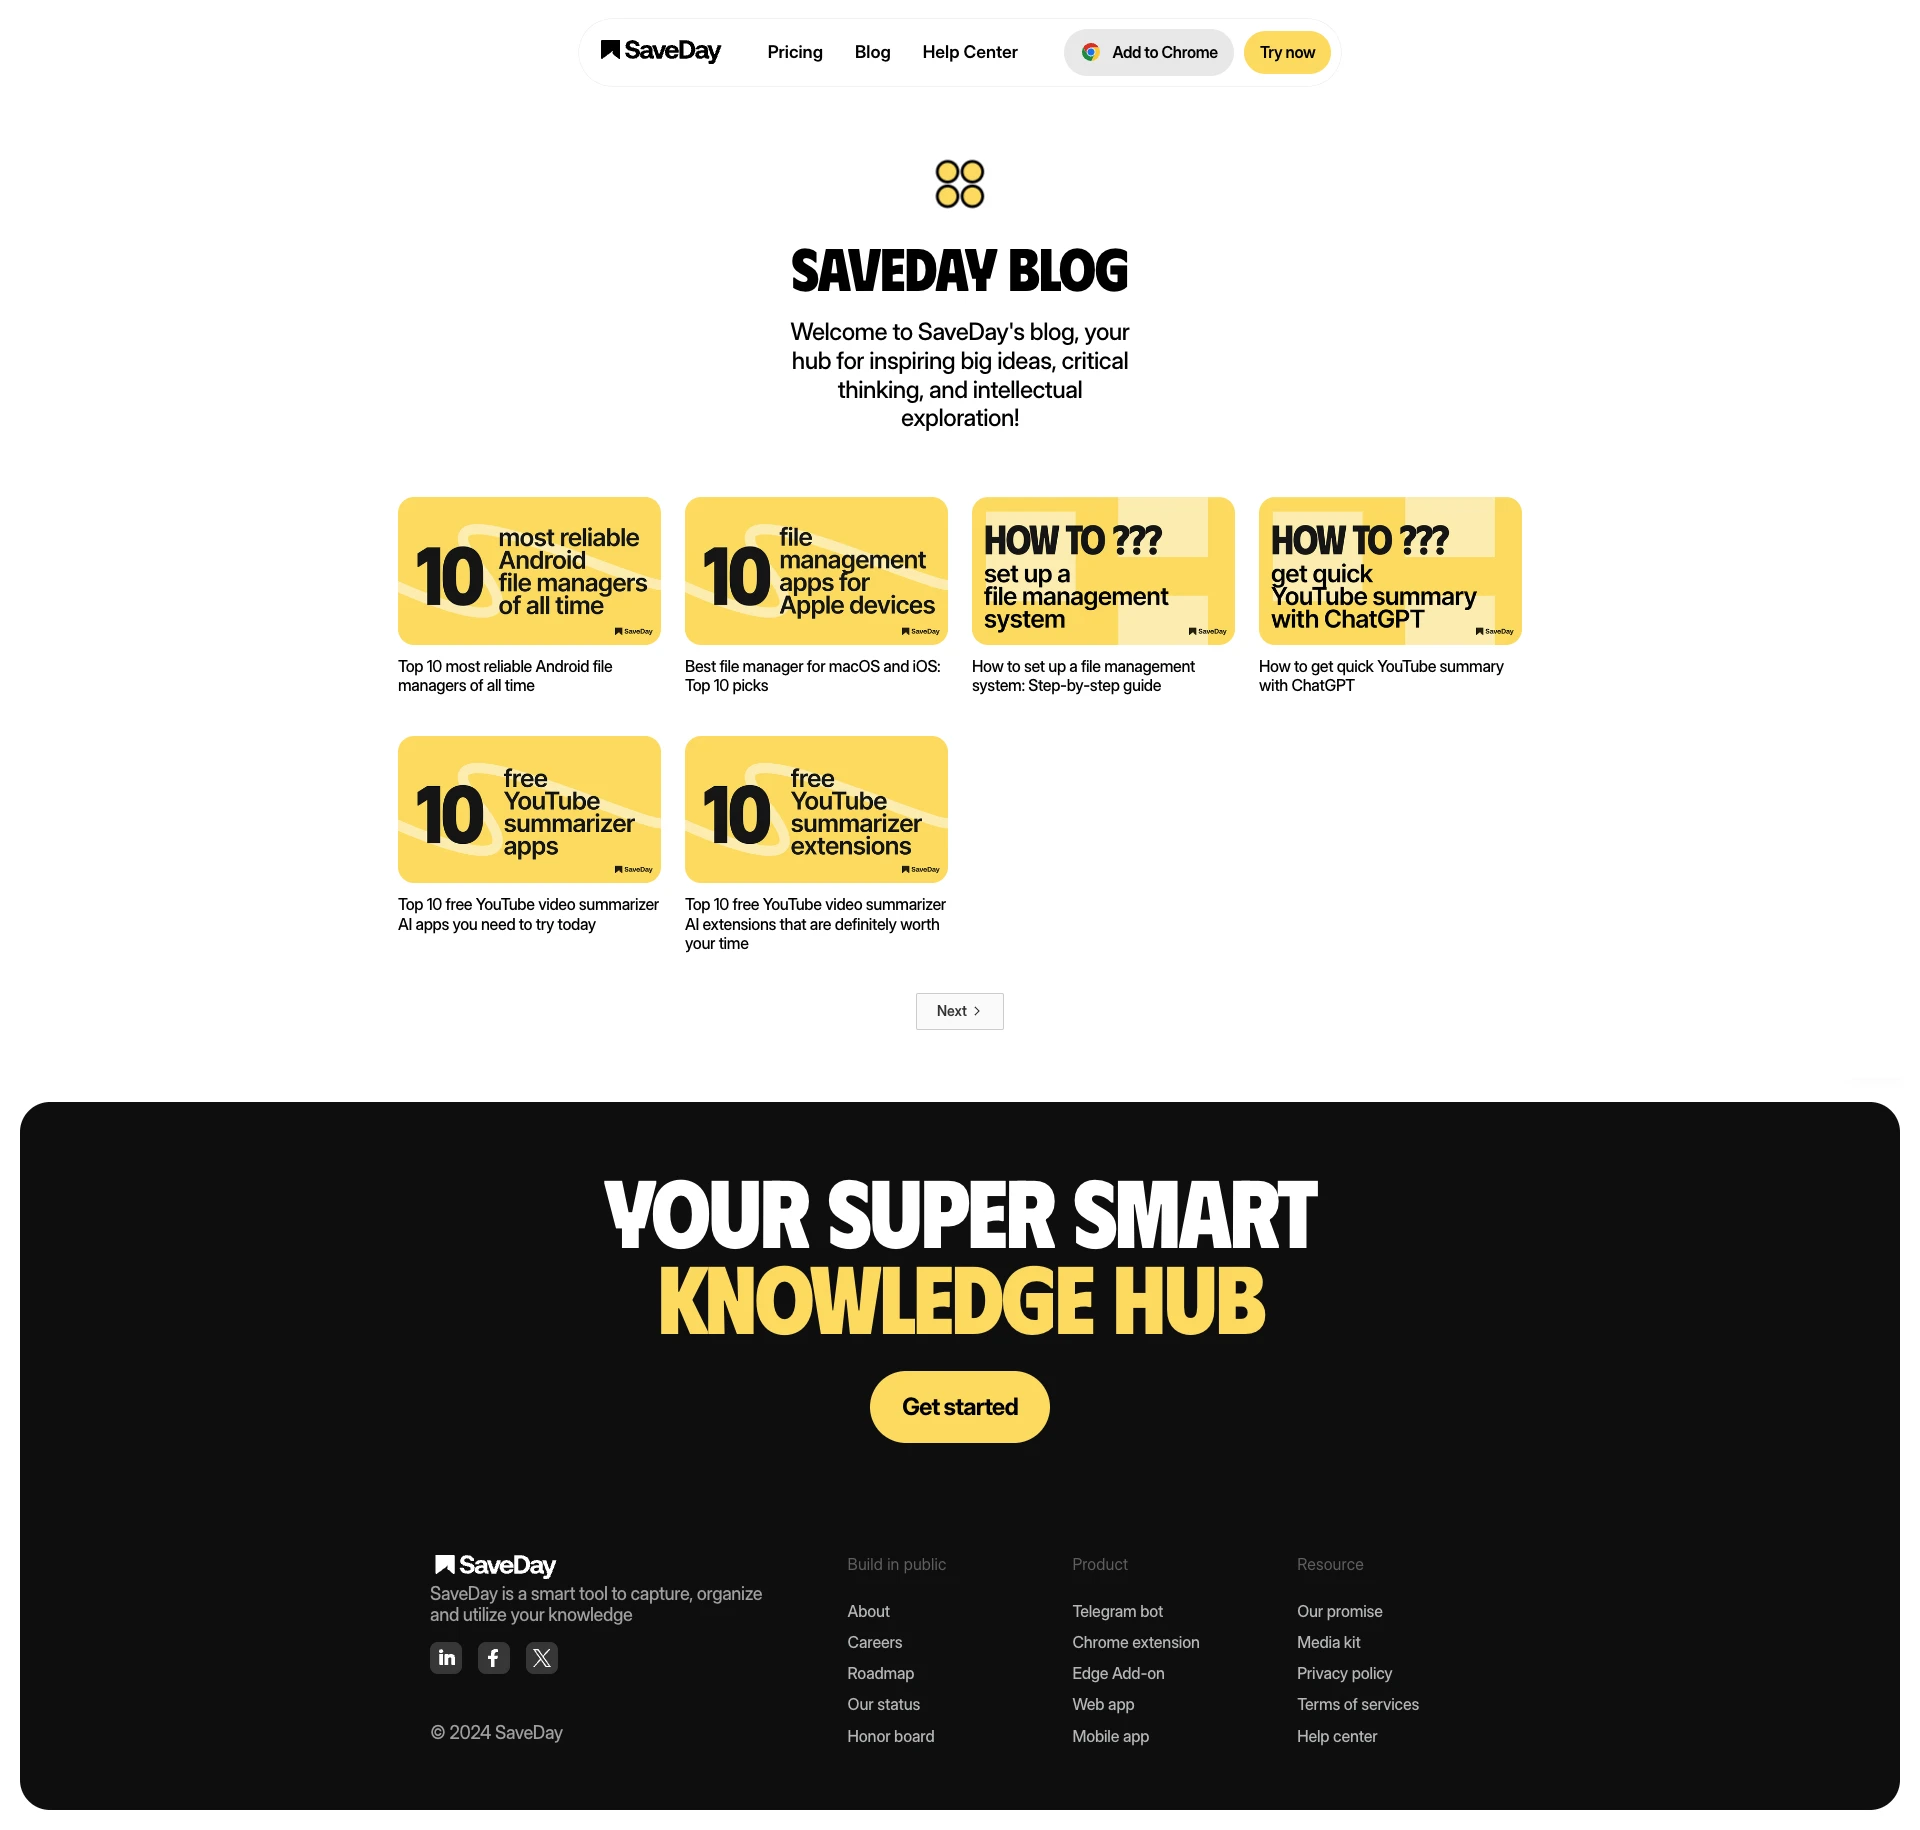 SaveDay Landing Page Example: Your super smart Knowledge Hub. SaveDay is a smart tool to capture, organize and utilize your knowledge.